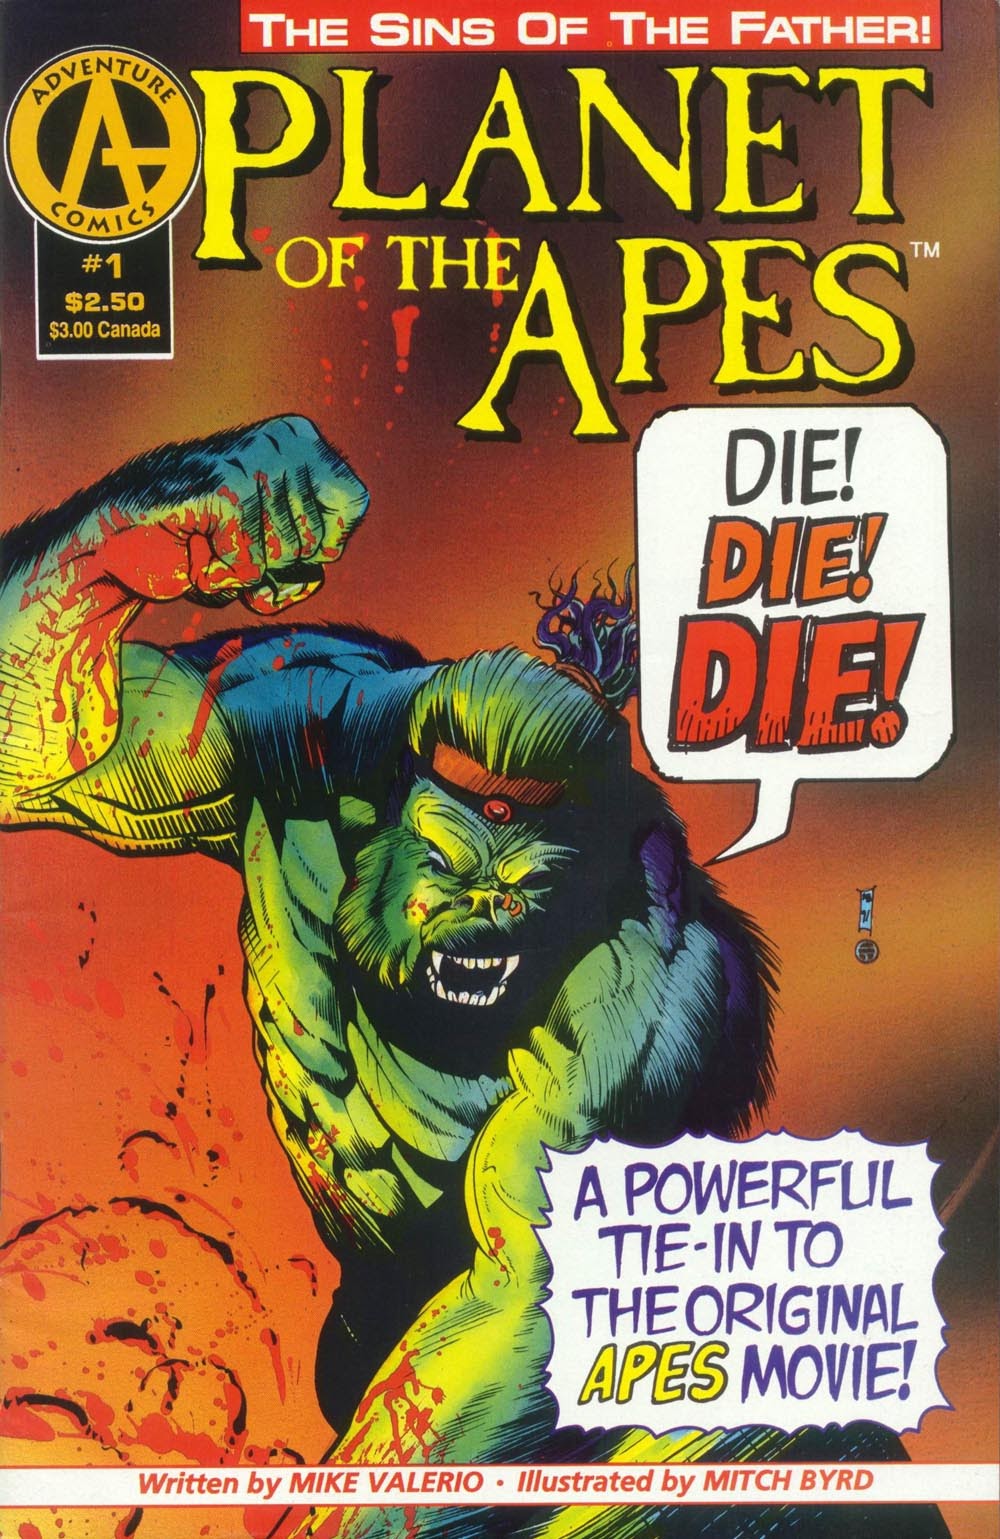 Read online Planet of the Apes: The Sins of the Father comic -  Issue # Full - 1